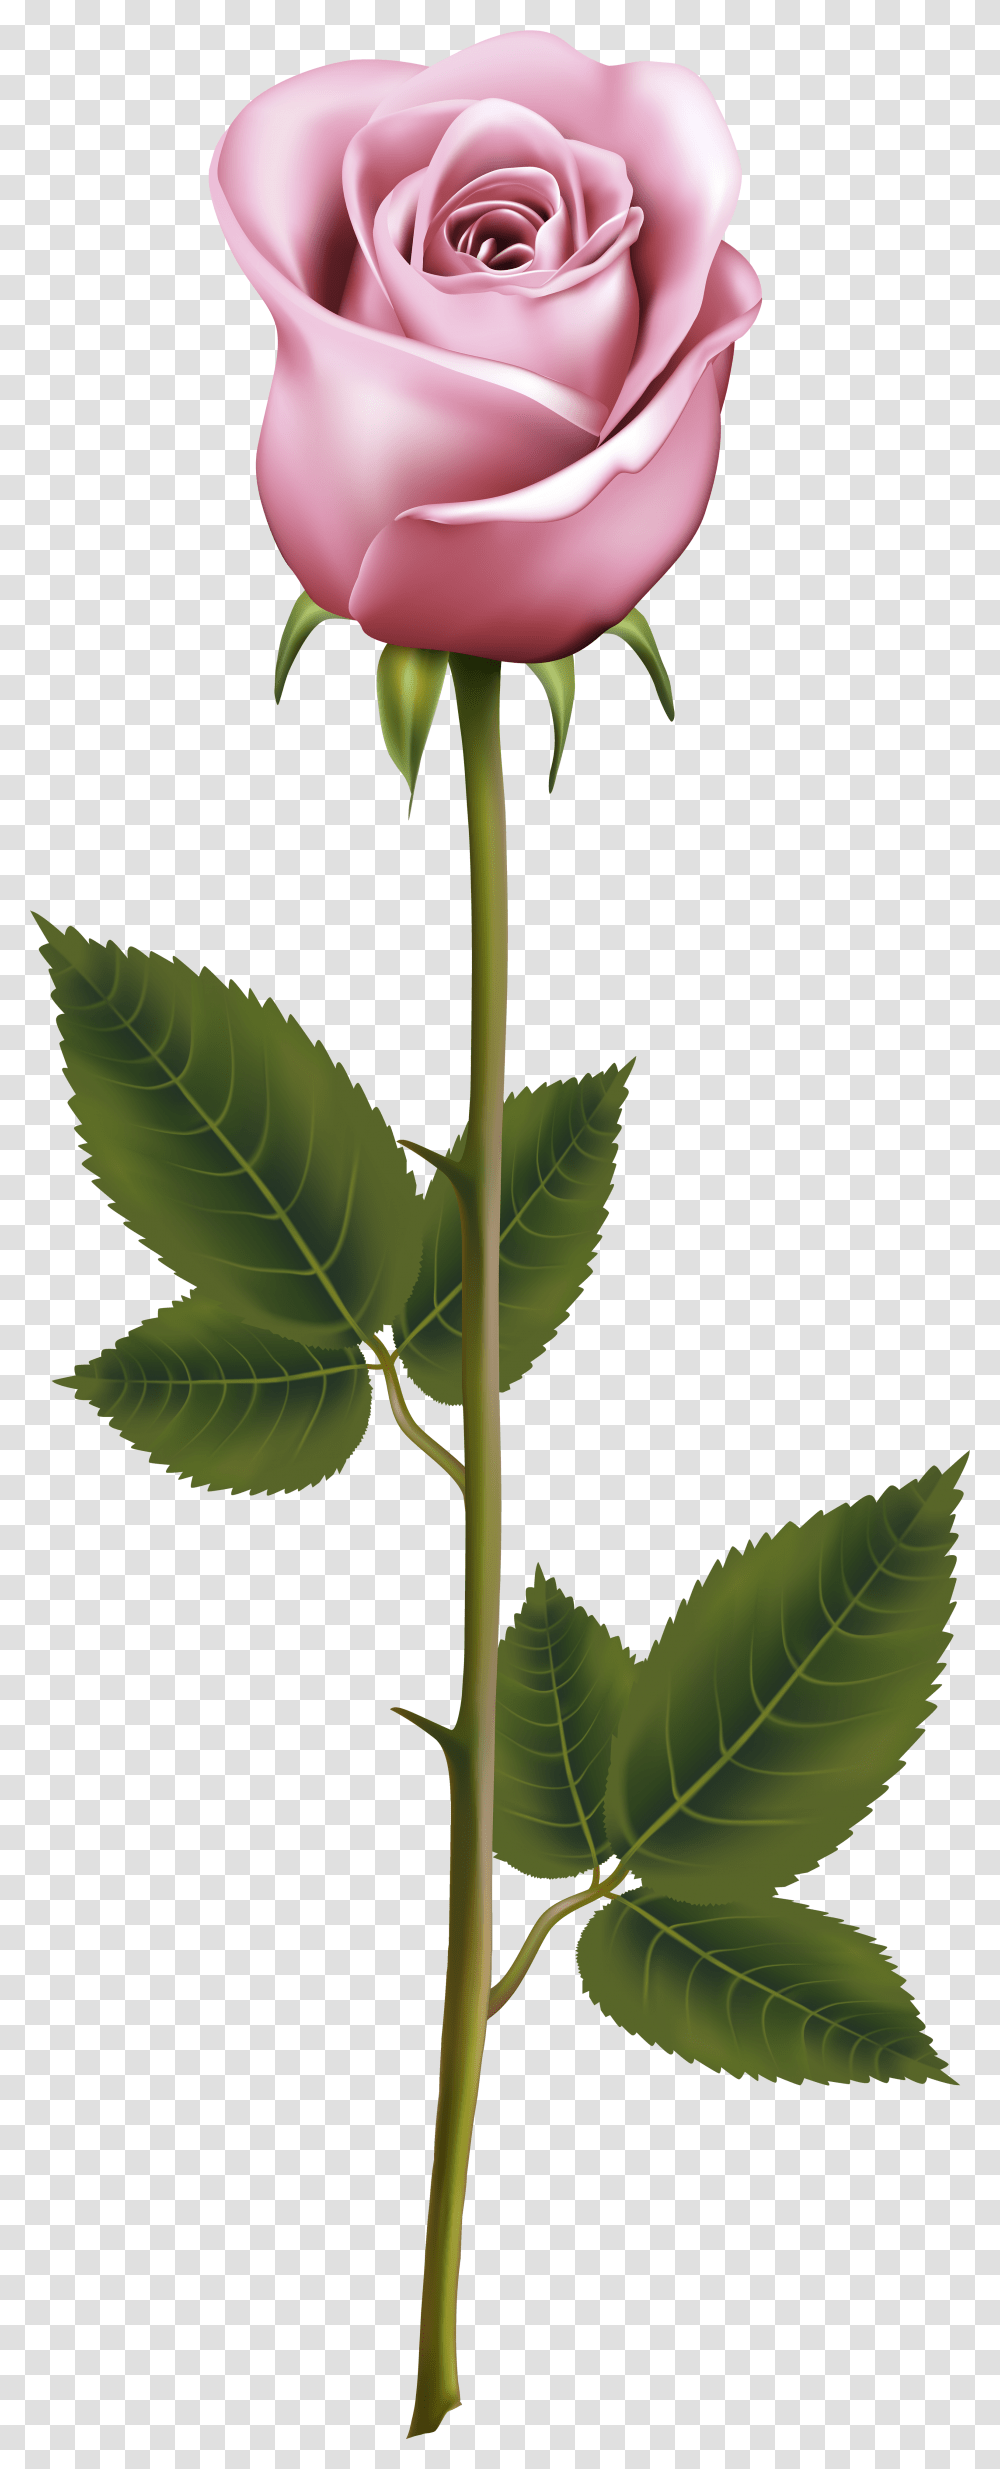 Flower Stems Picture Rose With Stem Transparent Png